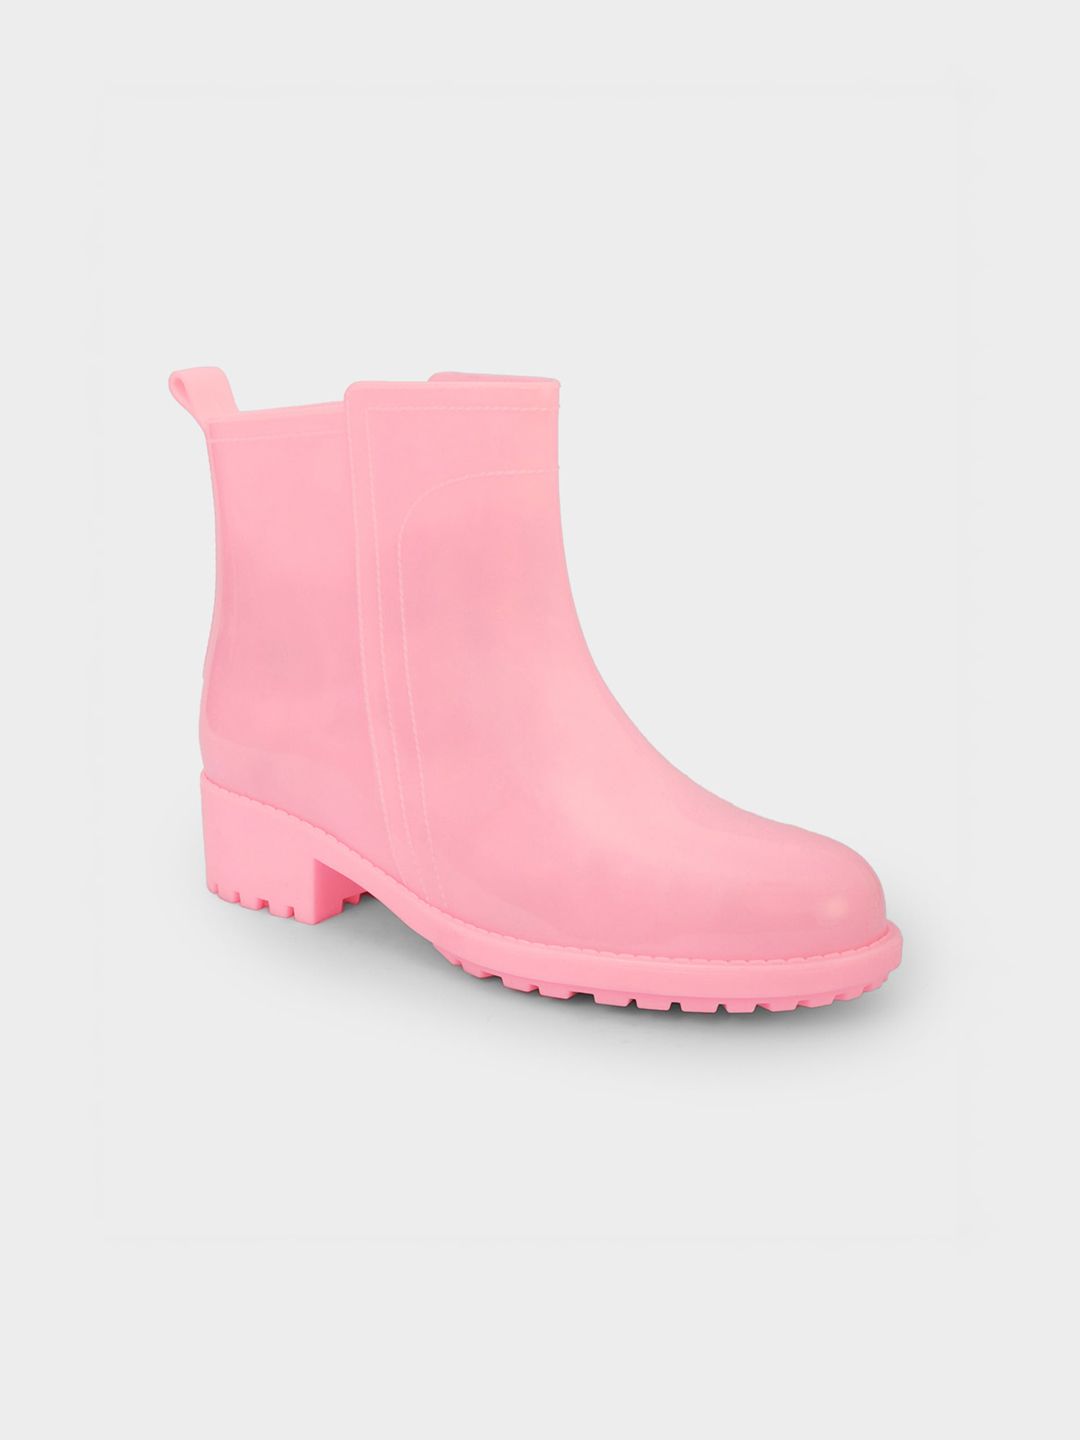 20Dresses Women Pink Solid Ankle Length Rain Boots Price in India